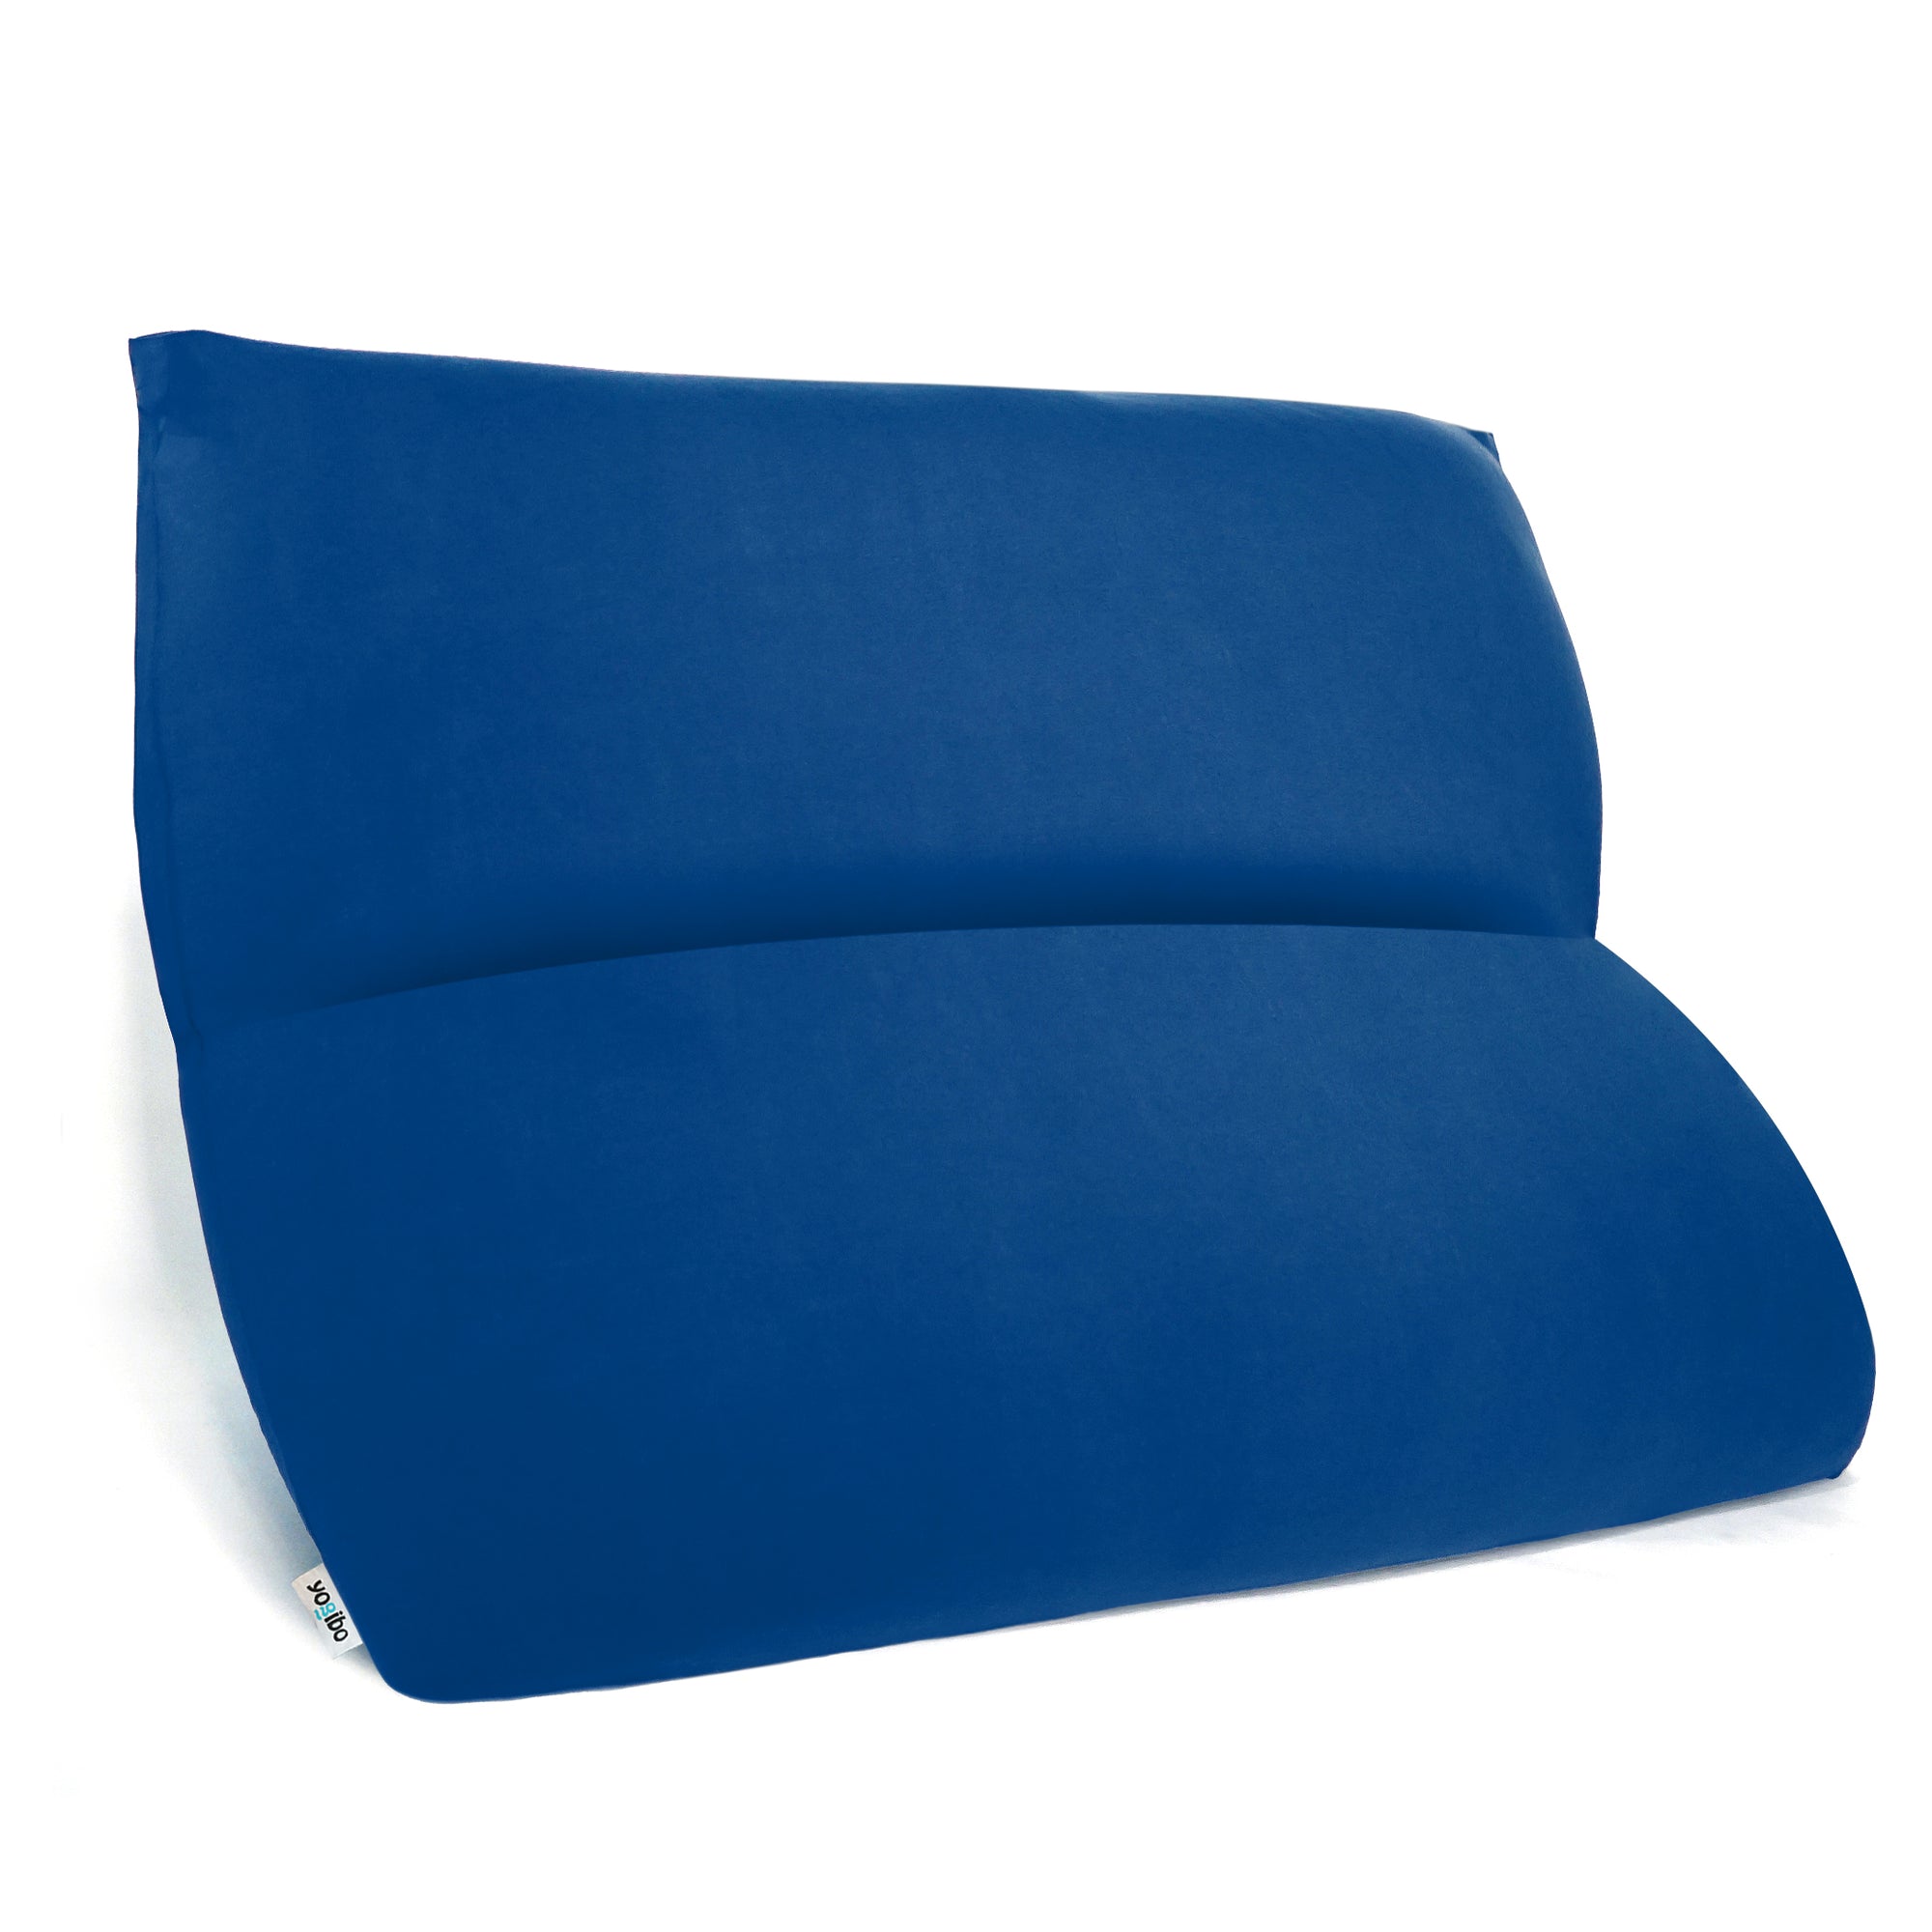 Yogibo Double Bean Bag Chair, Bed and Couch - Yogibo®